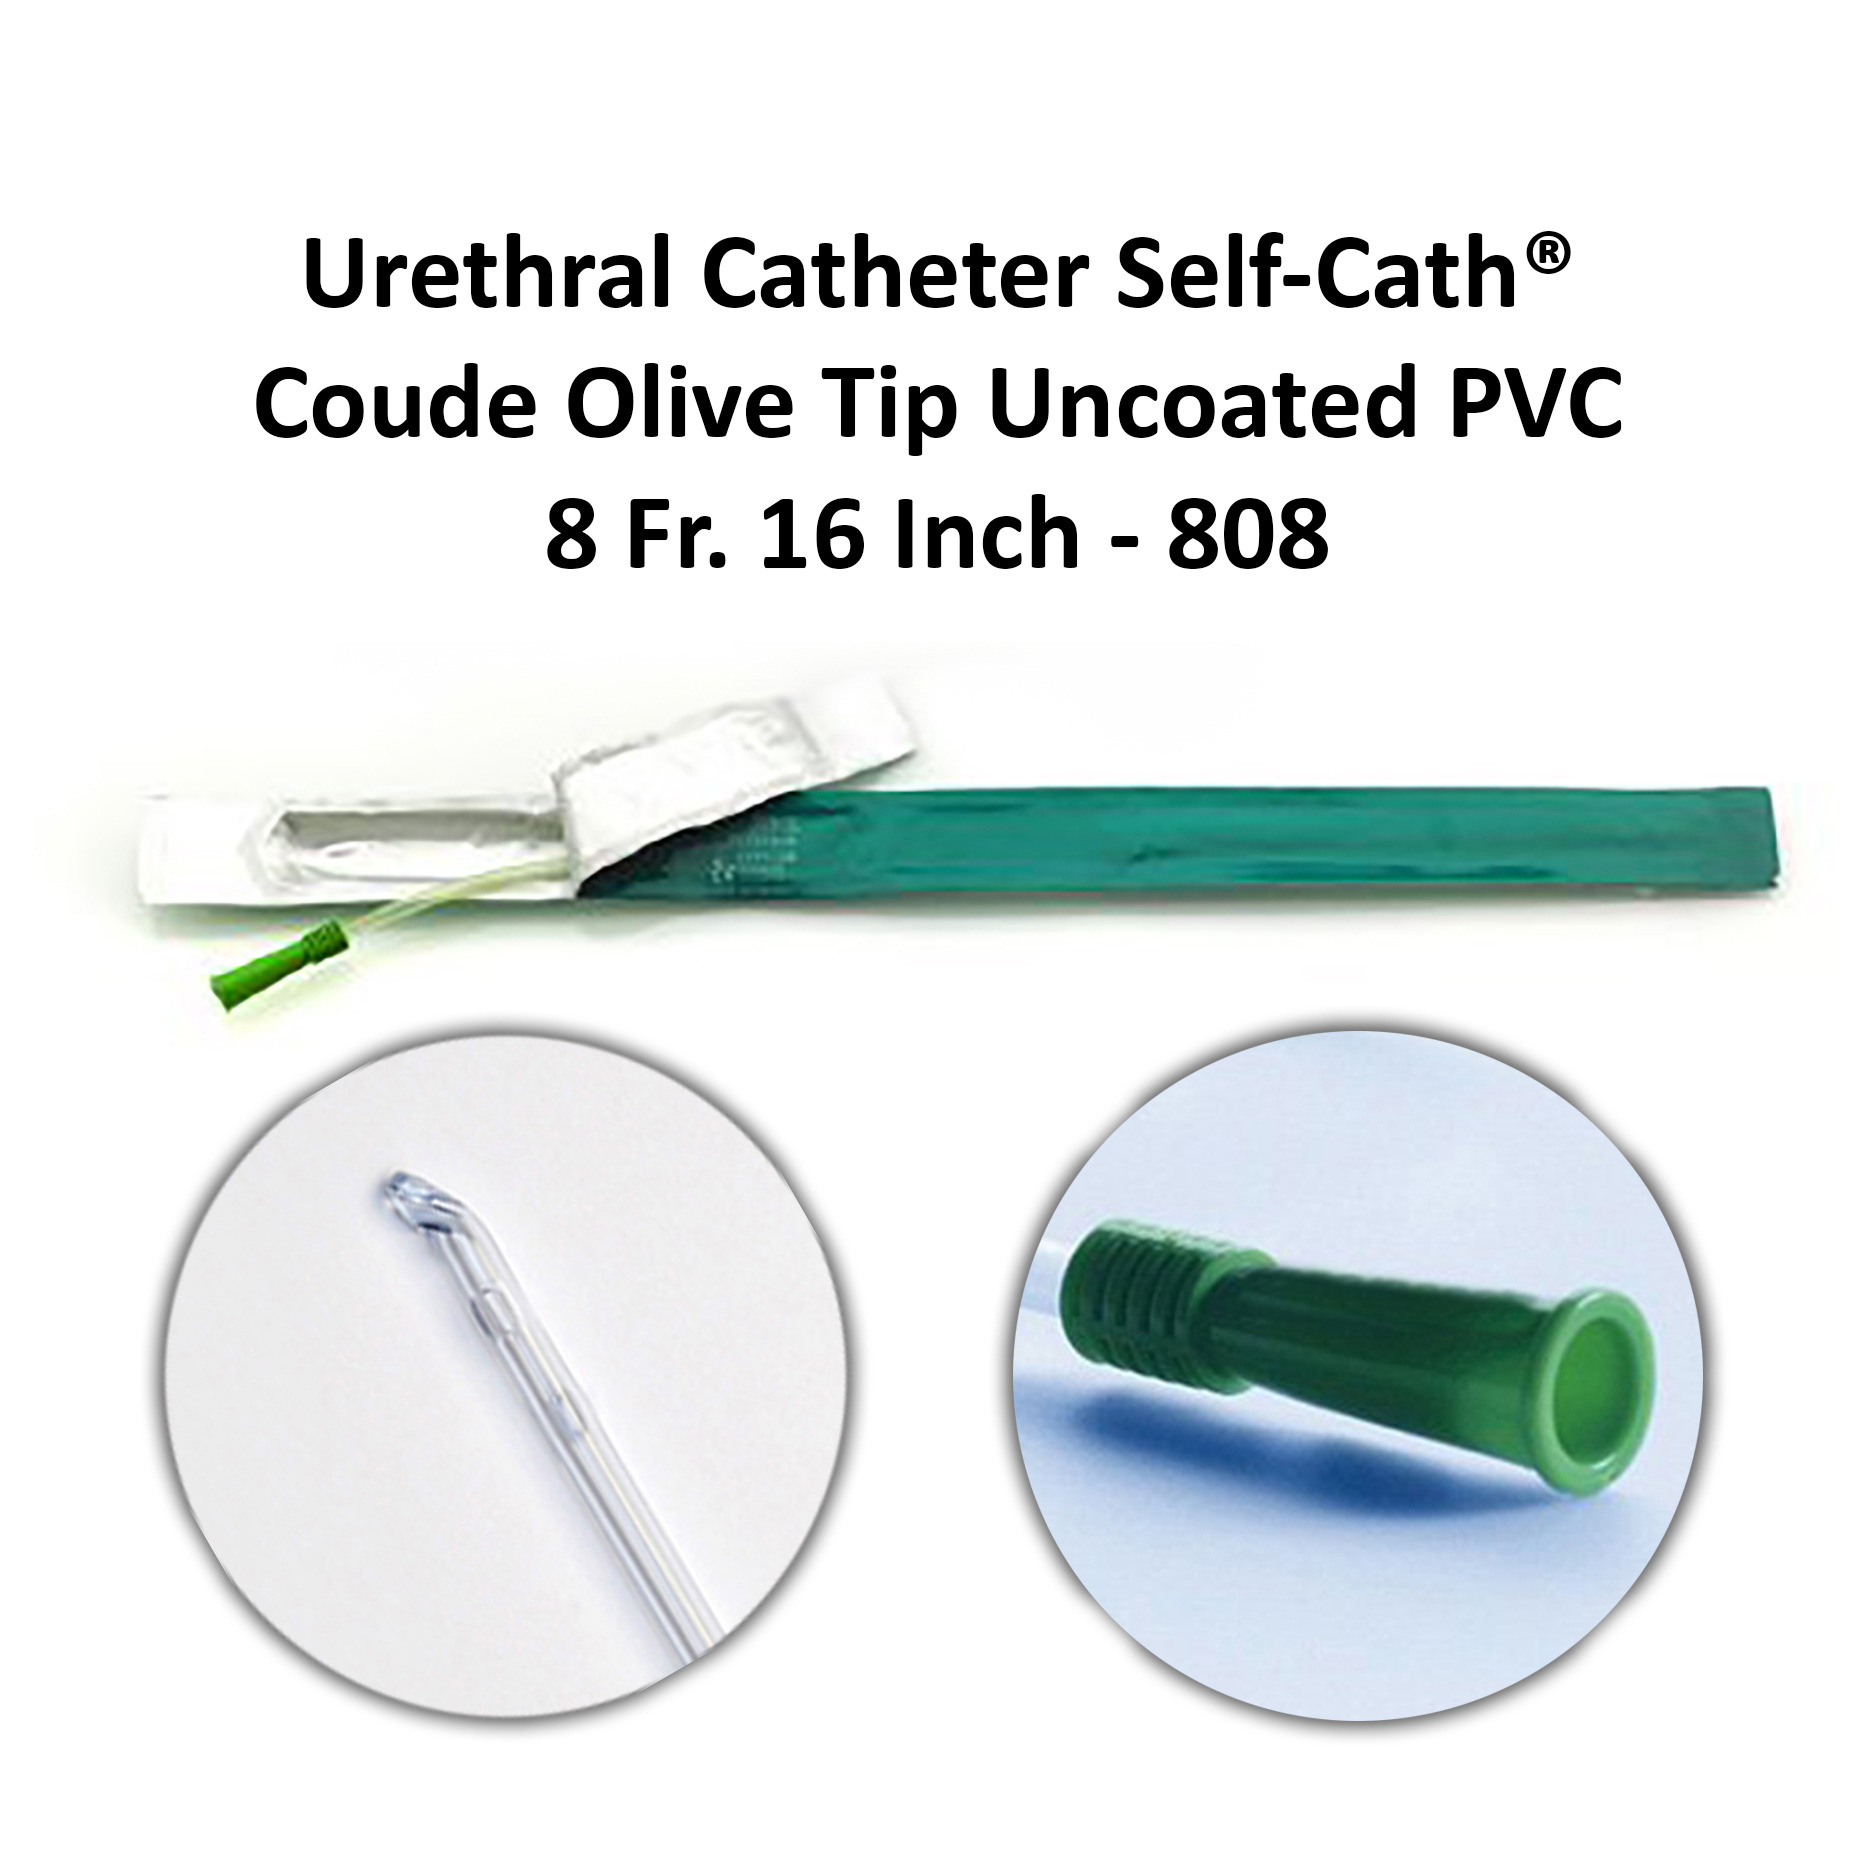 Urethral Catheter Self-Cath® Coude Olive Tip Uncoated PVC 8 Fr - 16 Inch - 808 Available in Michigan USA